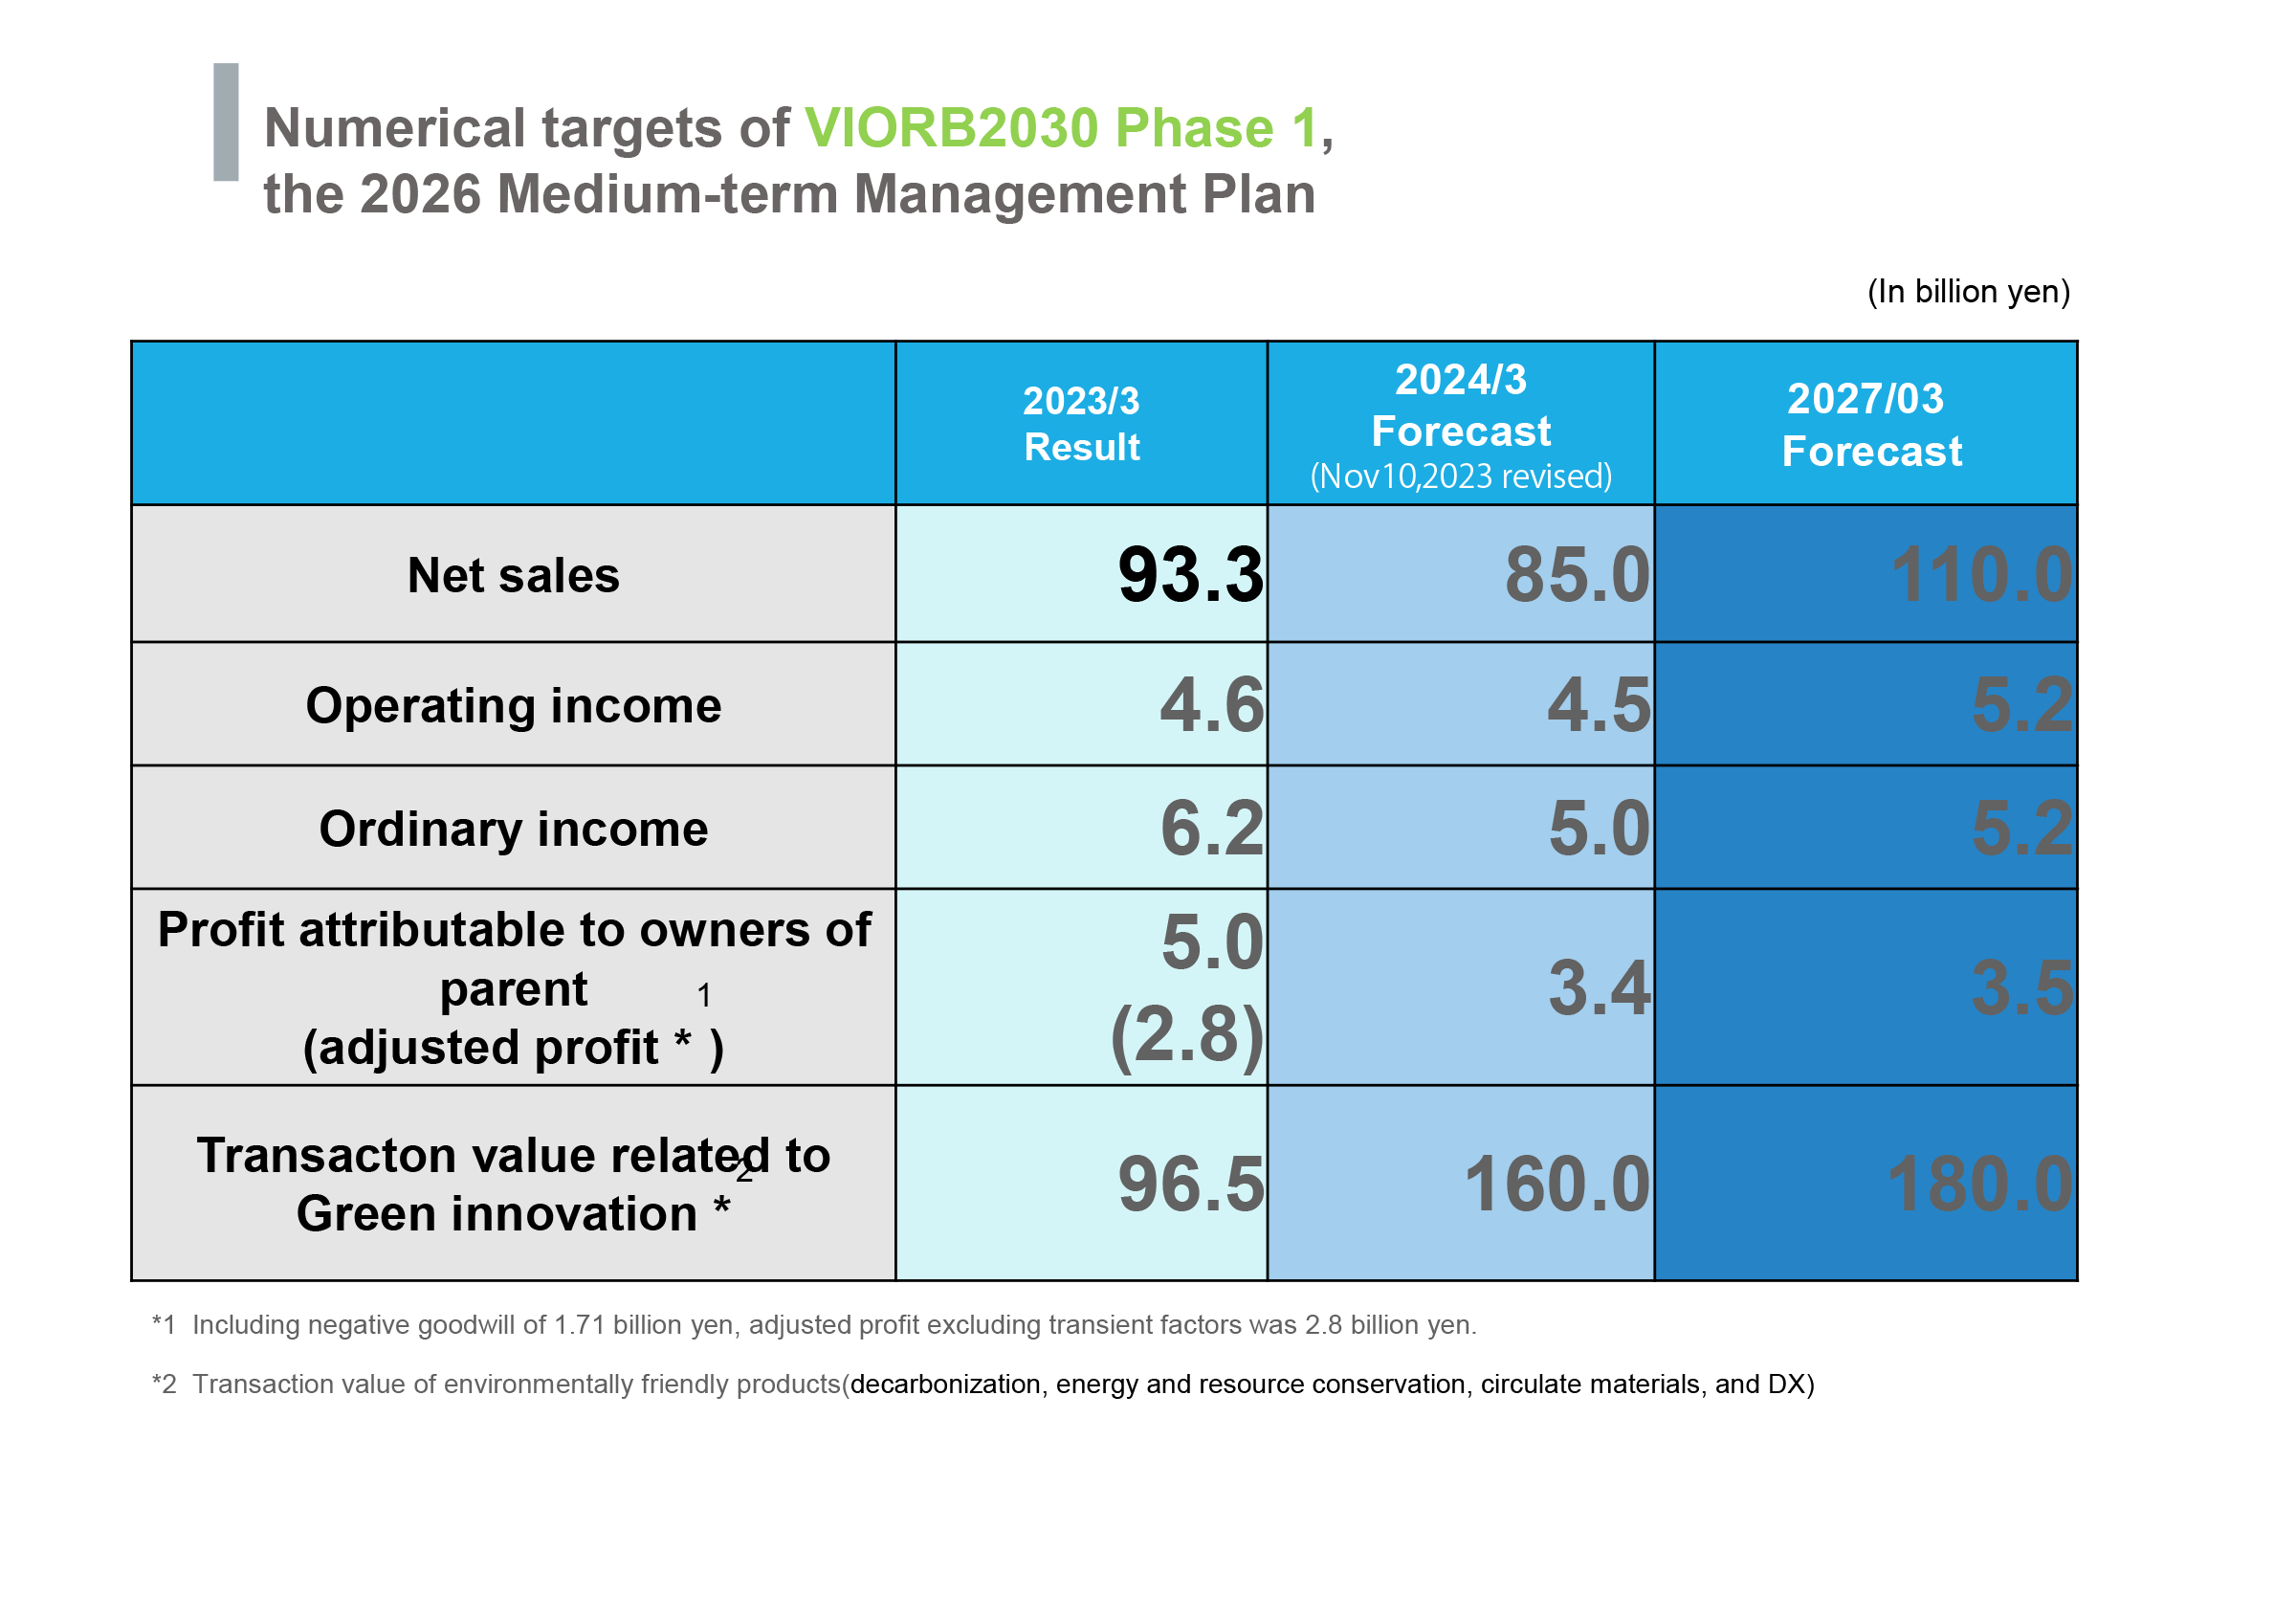 Numerical targets of VIORB2030 Phase1 the 2026 Medium-term Management Plan